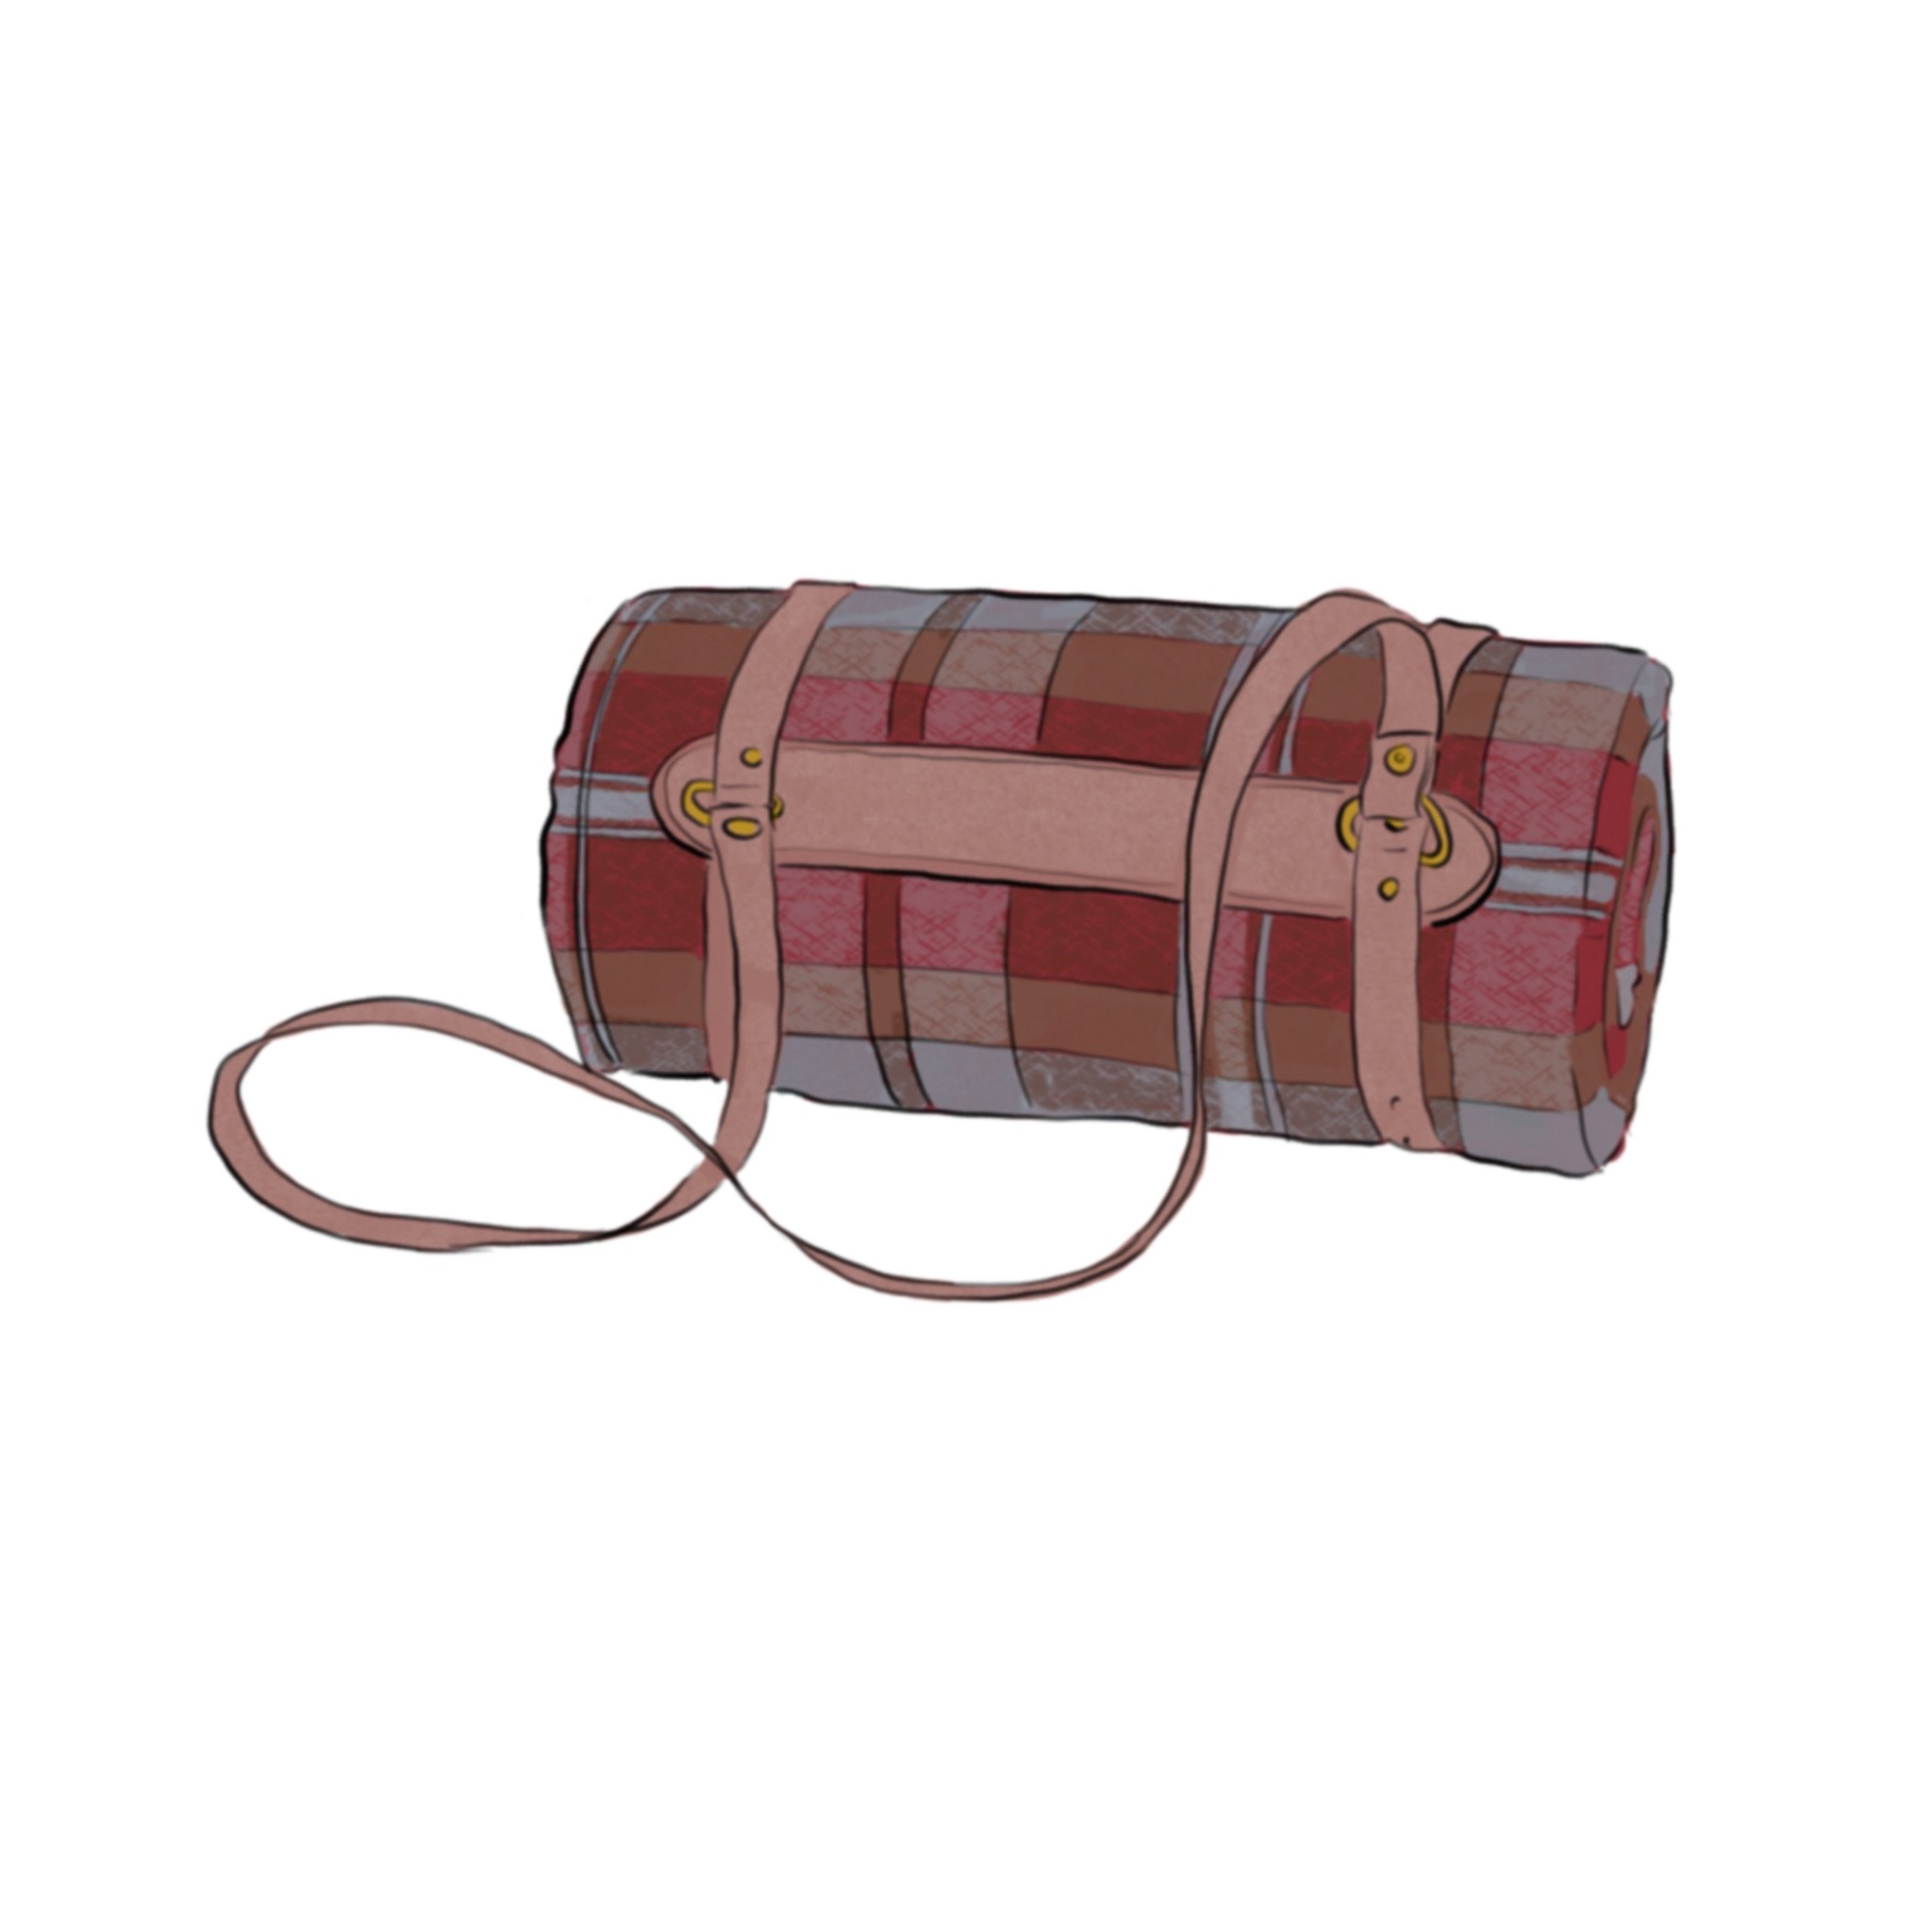 Illustration of plaid blanket rolled up with a leather carrying strap around it.